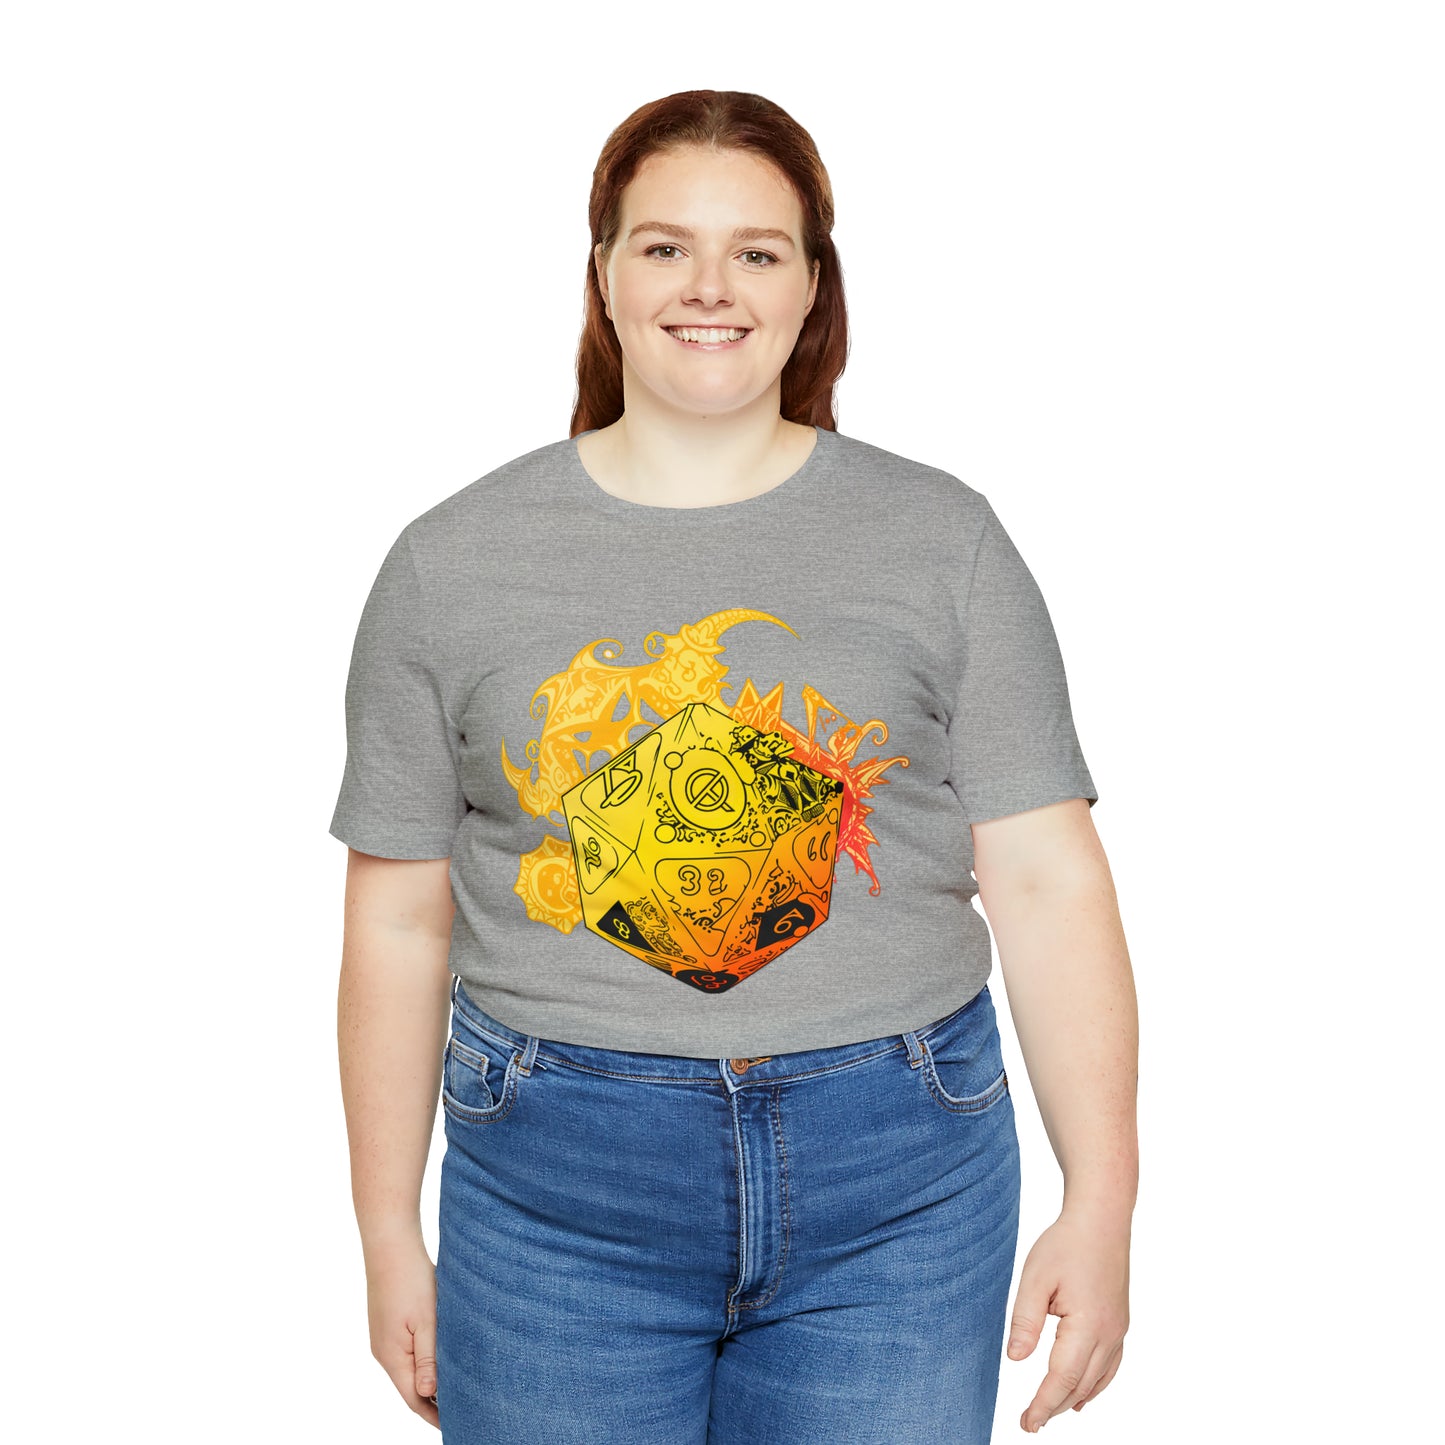 athletic-heather-quest-thread-tee-shirt-with-large-yellow-dragon-dice-on-center-of-shirt